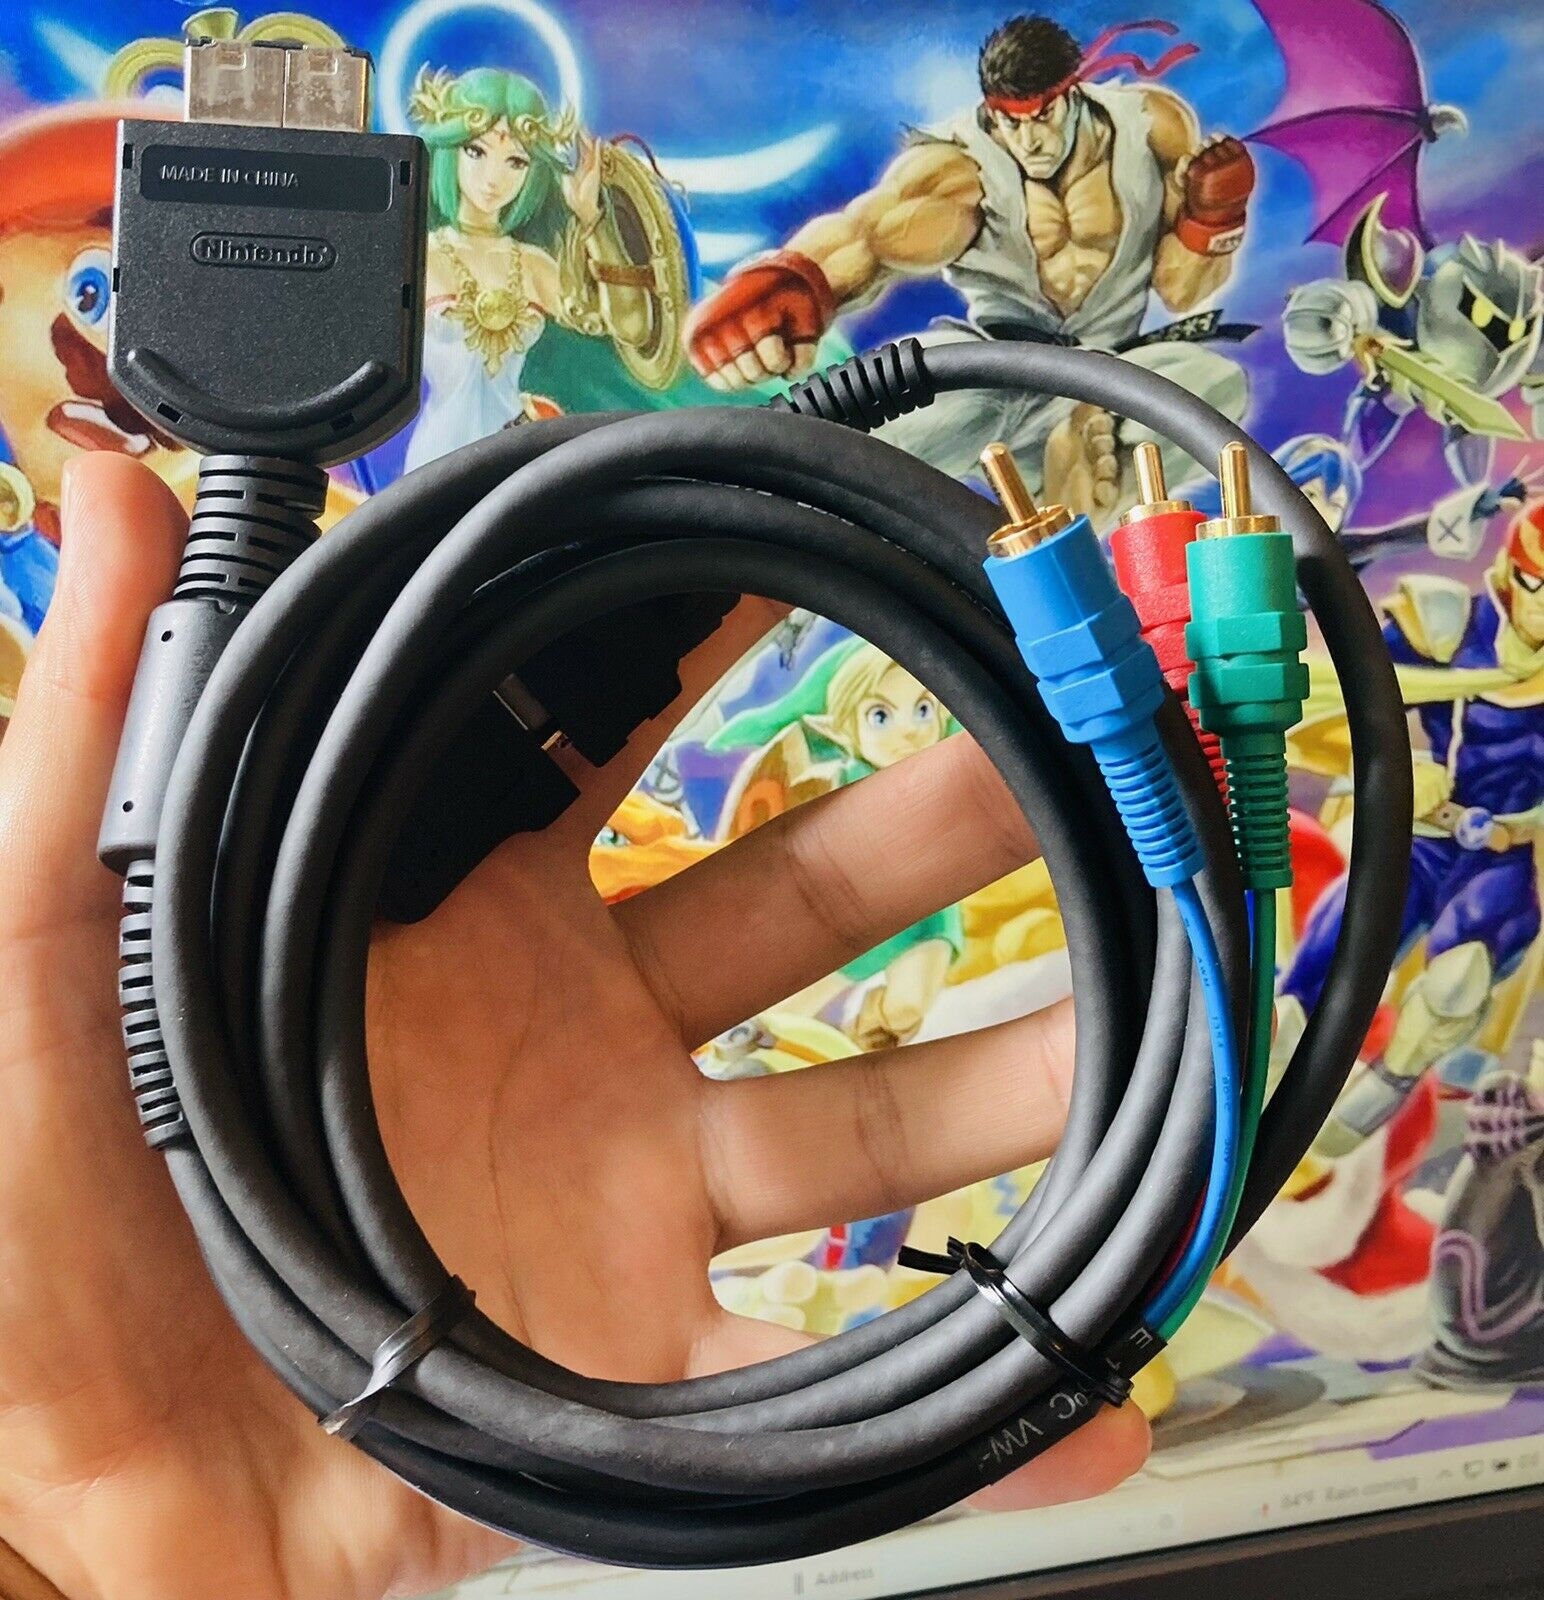 Found an official Wii component cable for cheap. If only GameCube